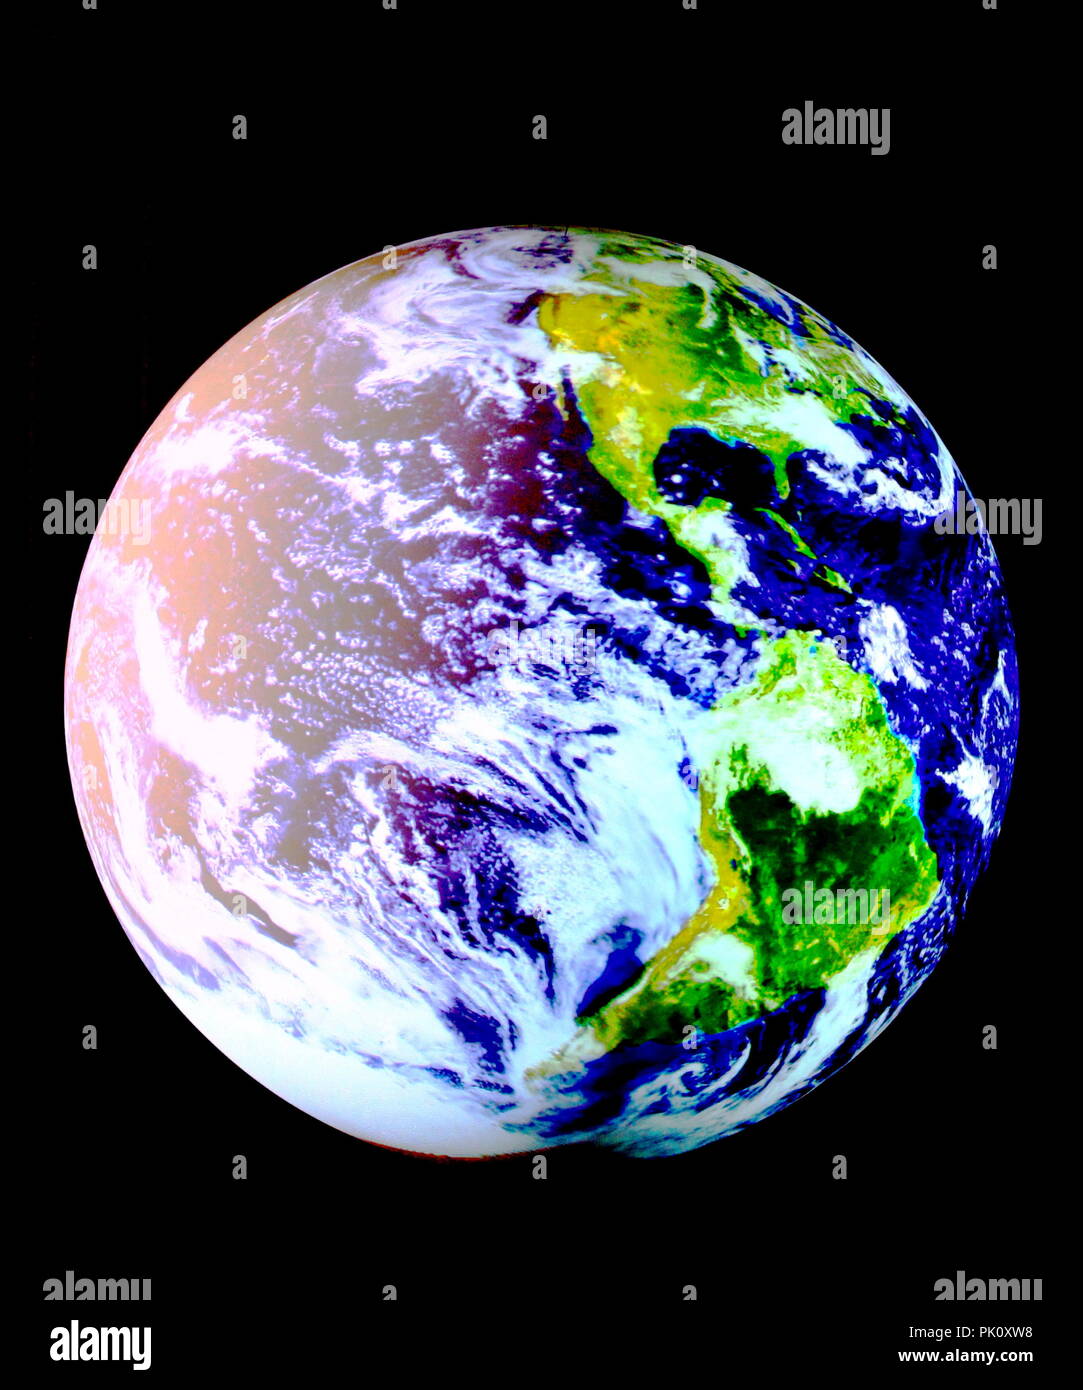 Earth Model. Planet Earth on black background Stock Photo